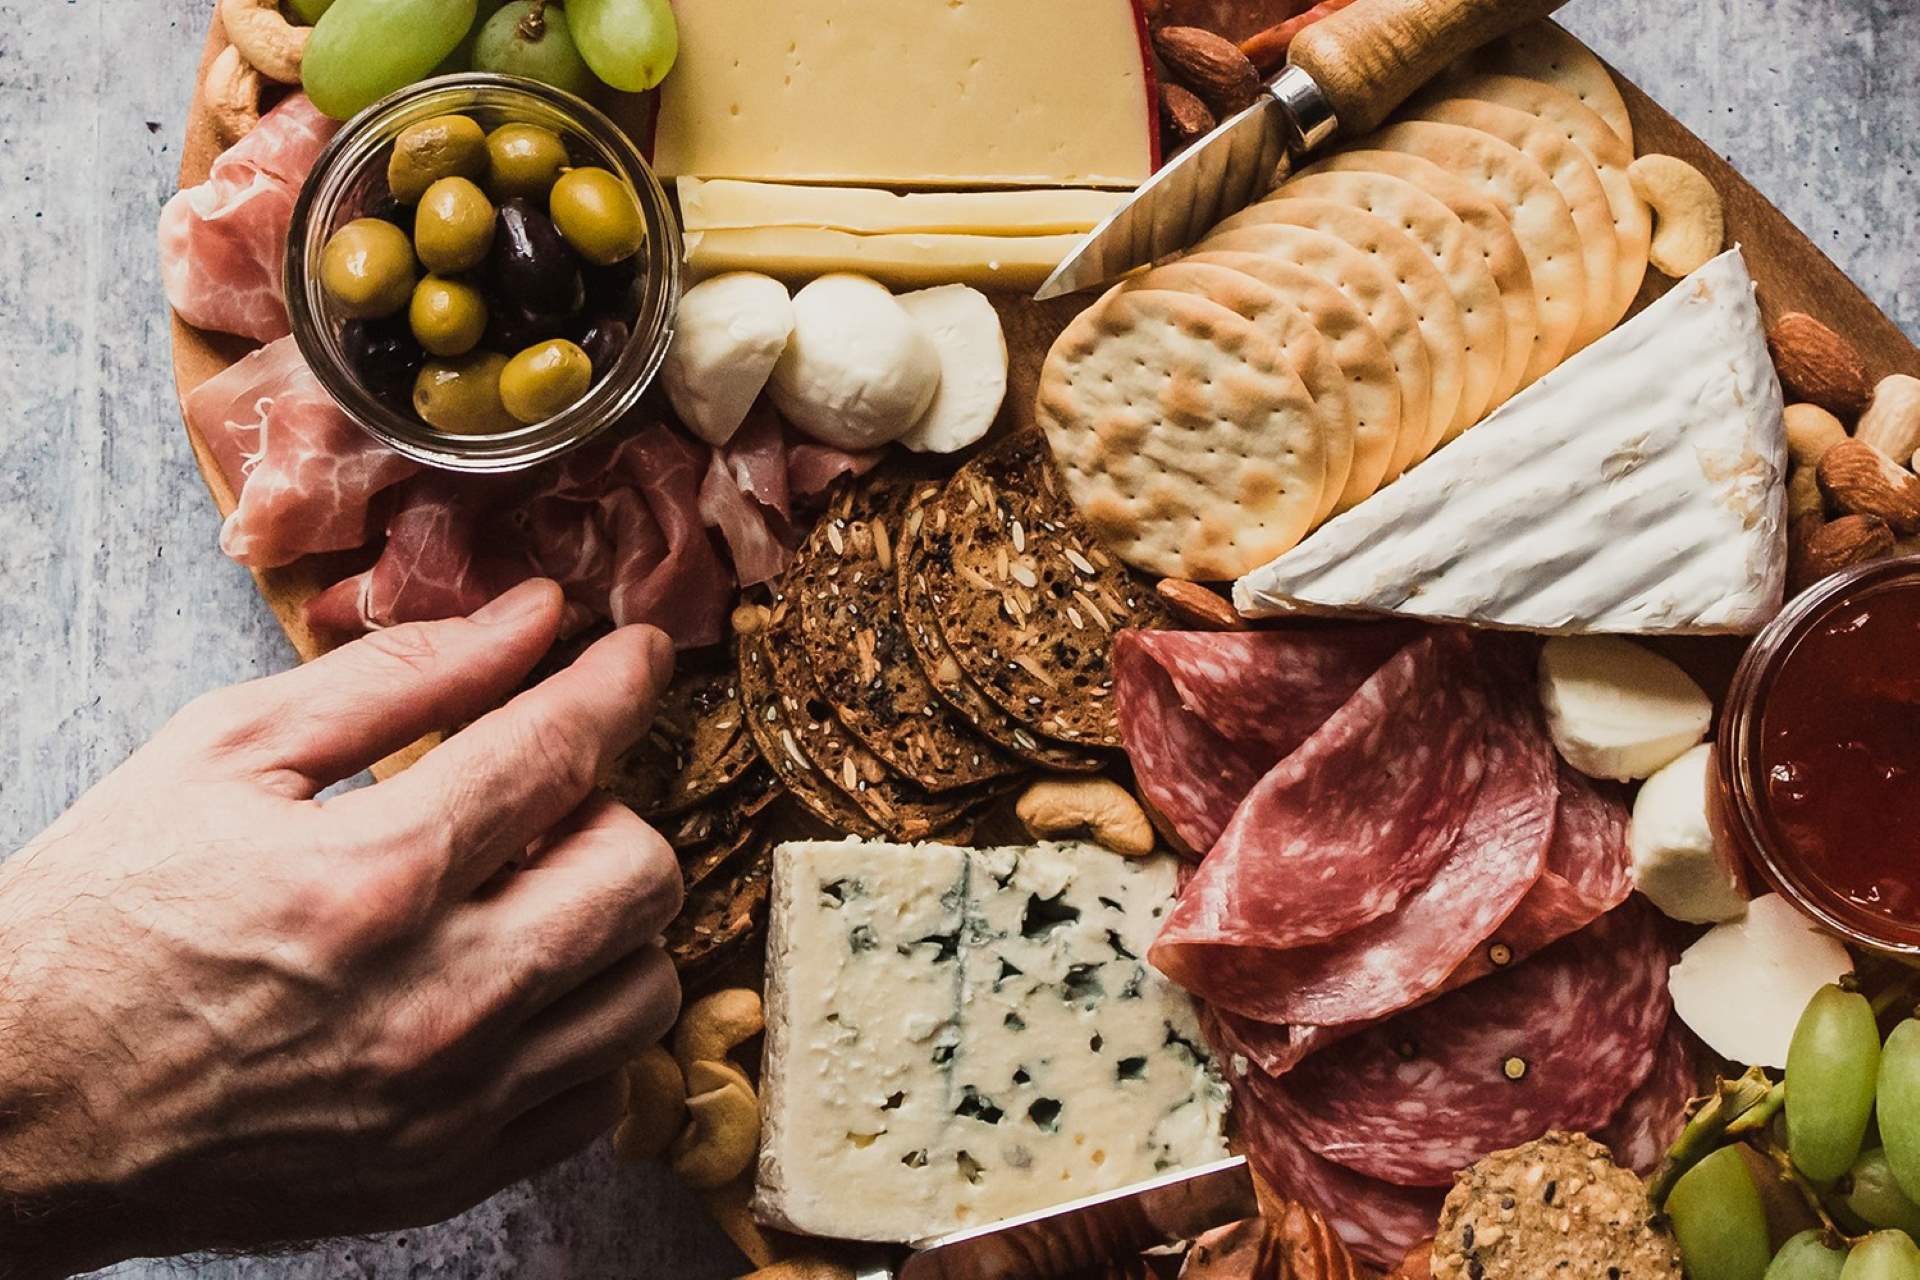 How to Build The Perfect Charcuterie Board For Your Next Party